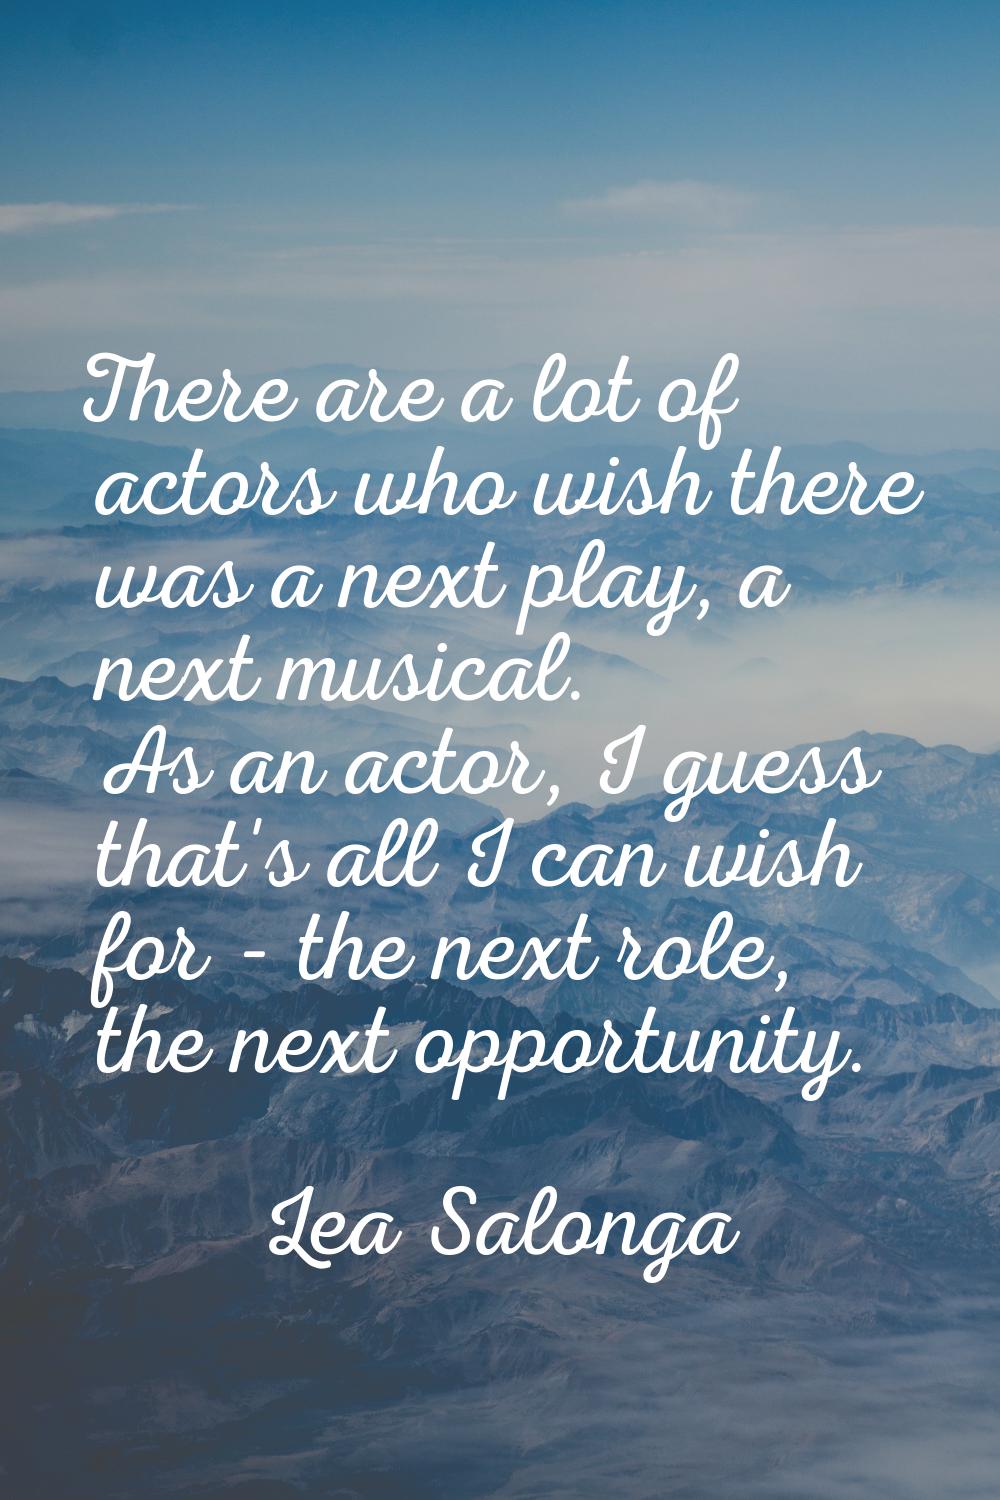 There are a lot of actors who wish there was a next play, a next musical. As an actor, I guess that